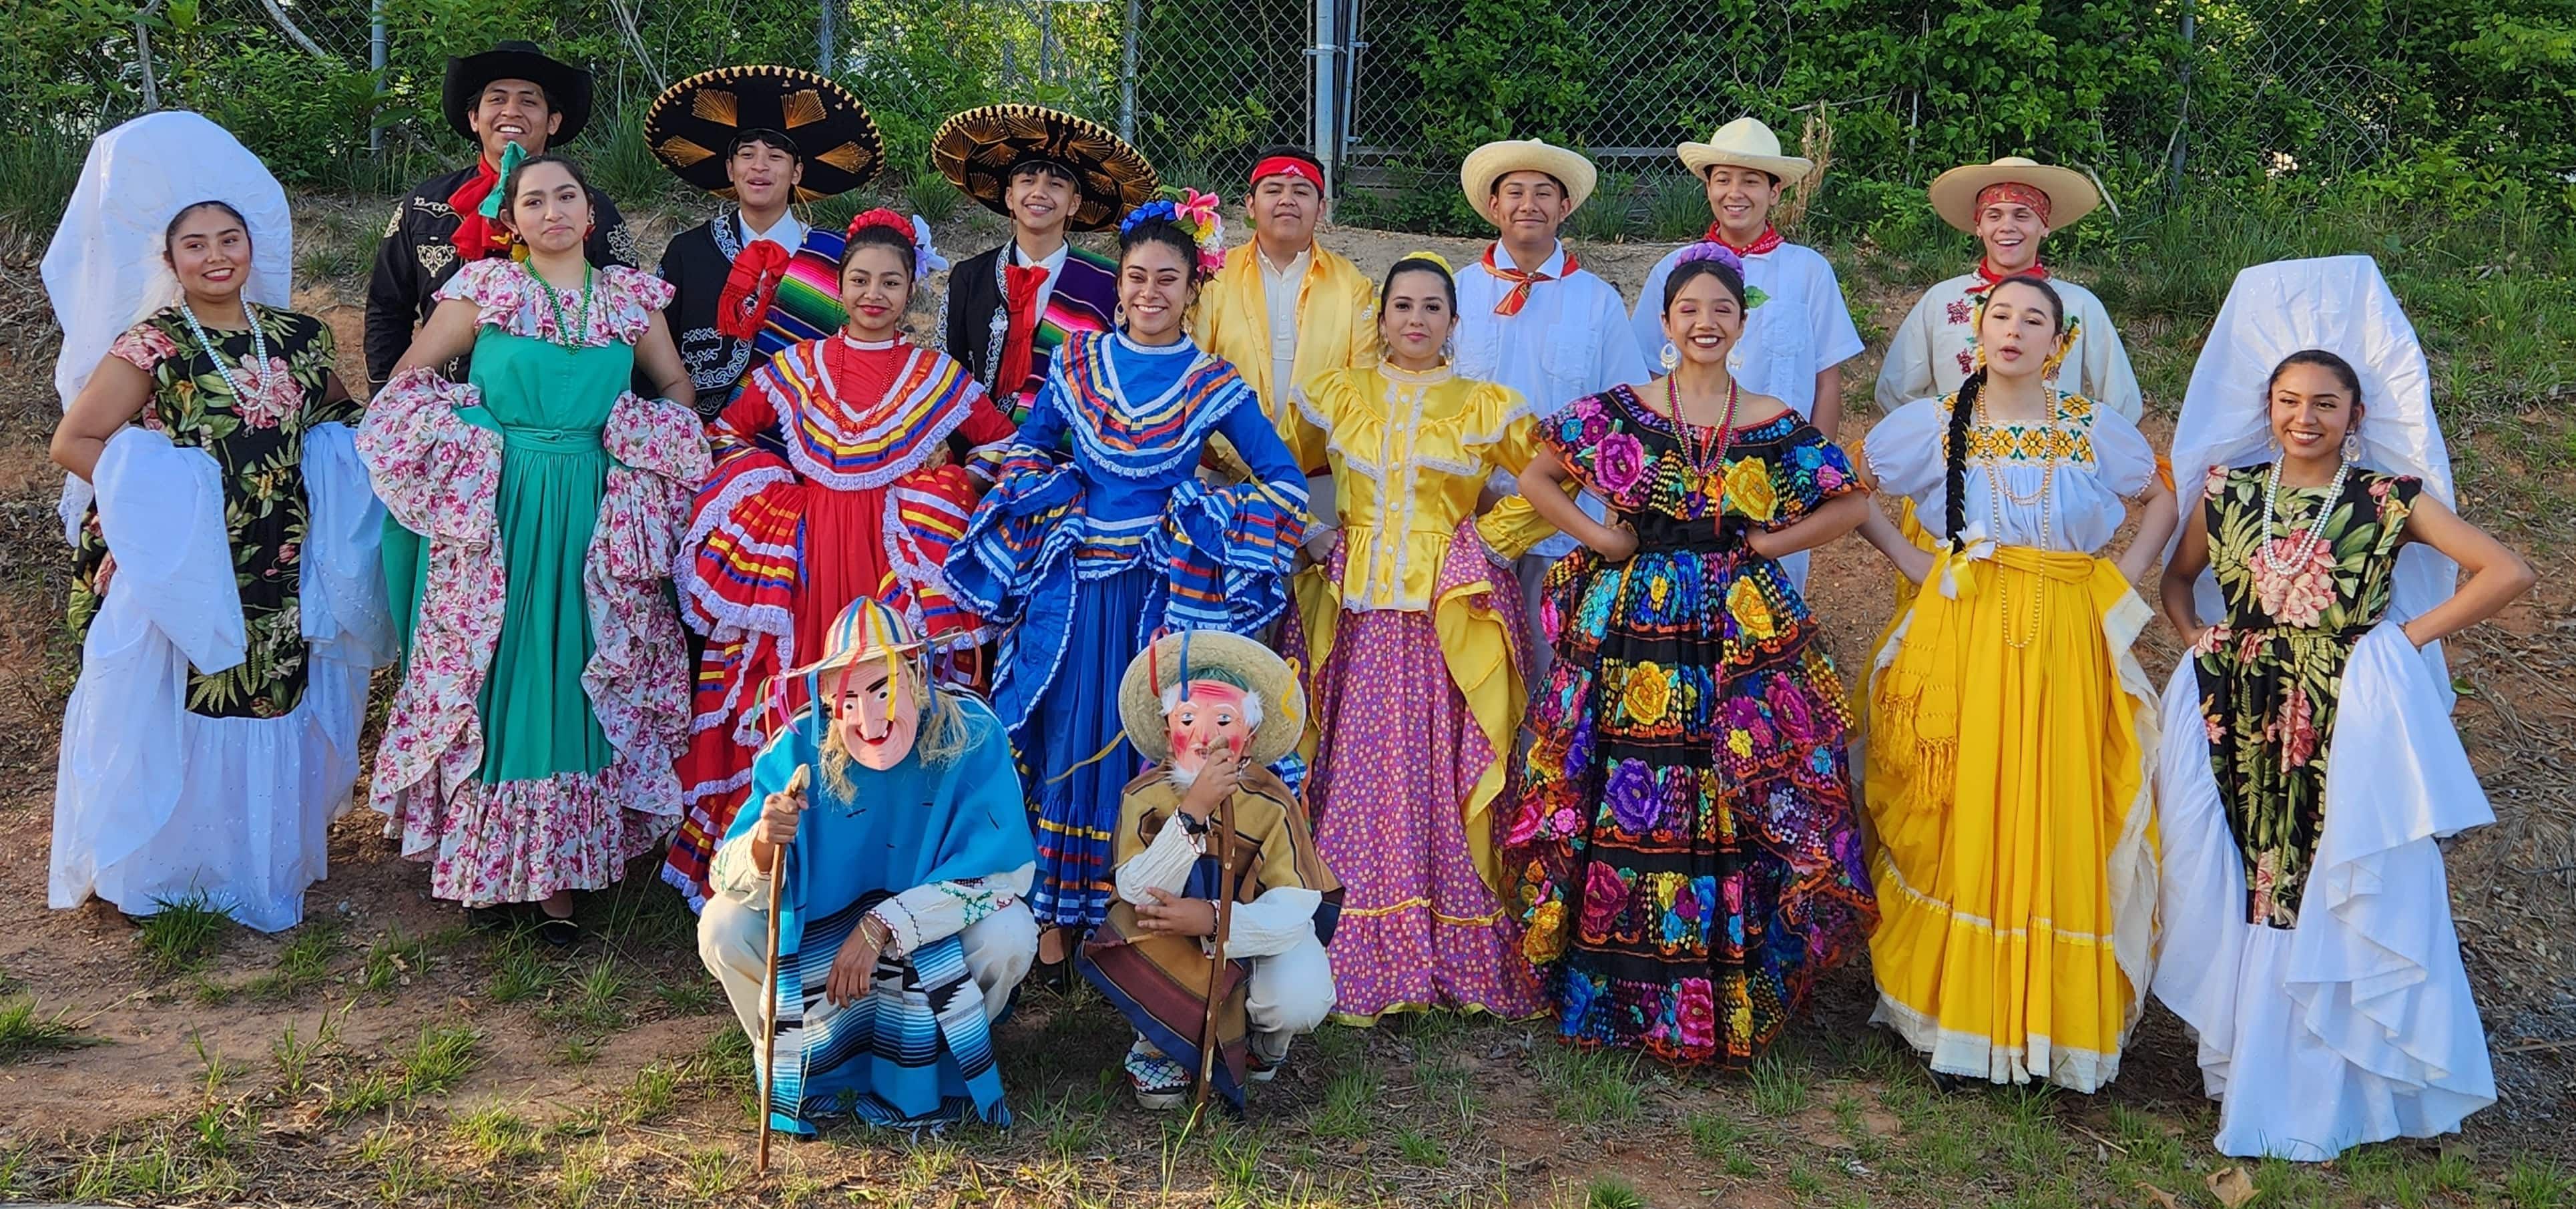 Dancers from the Ballet Folklórico Raíces are grouped together for a photo outside. They are smiling and wearing colorful folkloric dresses, suits, and costumes.